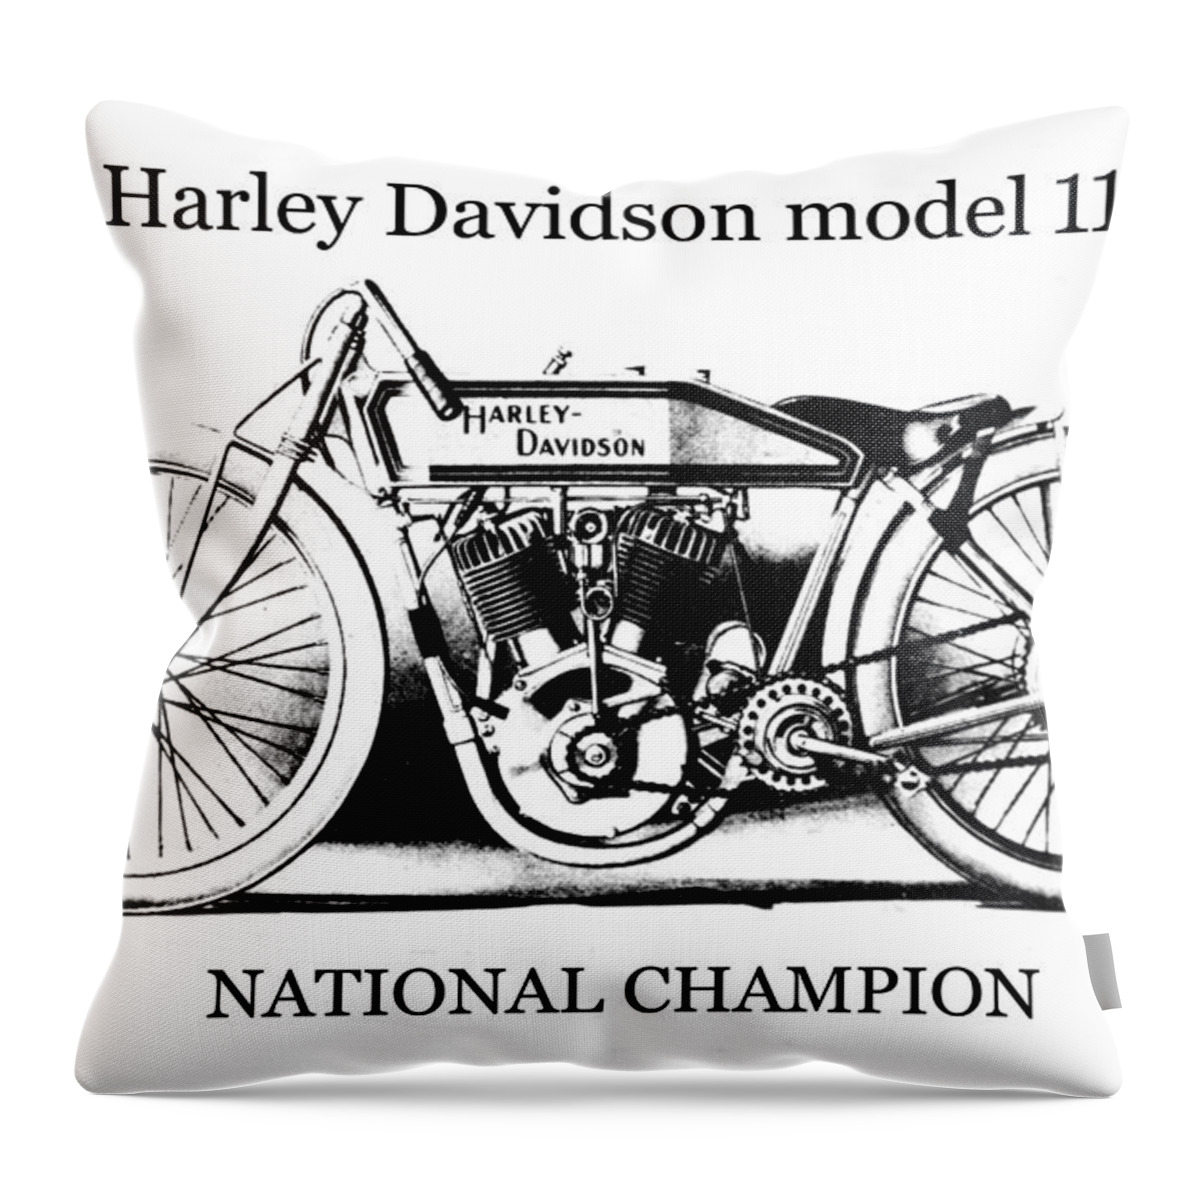 Harley Davidson Throw Pillow featuring the mixed media 1914 Harley Davidson model 11 K by David Lee Thompson